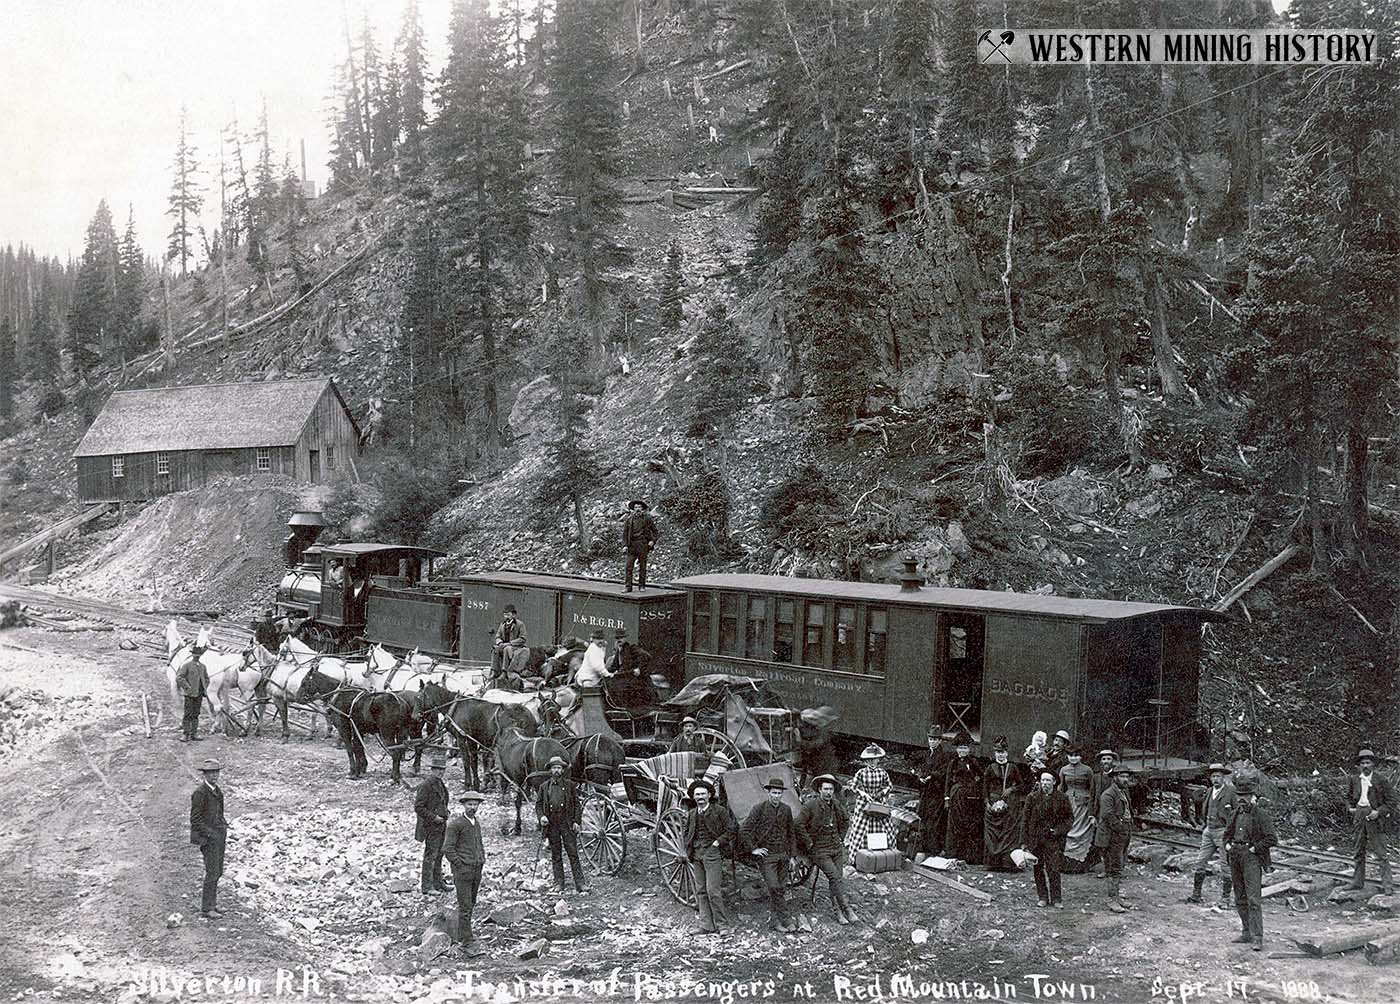 Passengers transfer between carriage and train at Red Mountain Town Sept. 17 1888